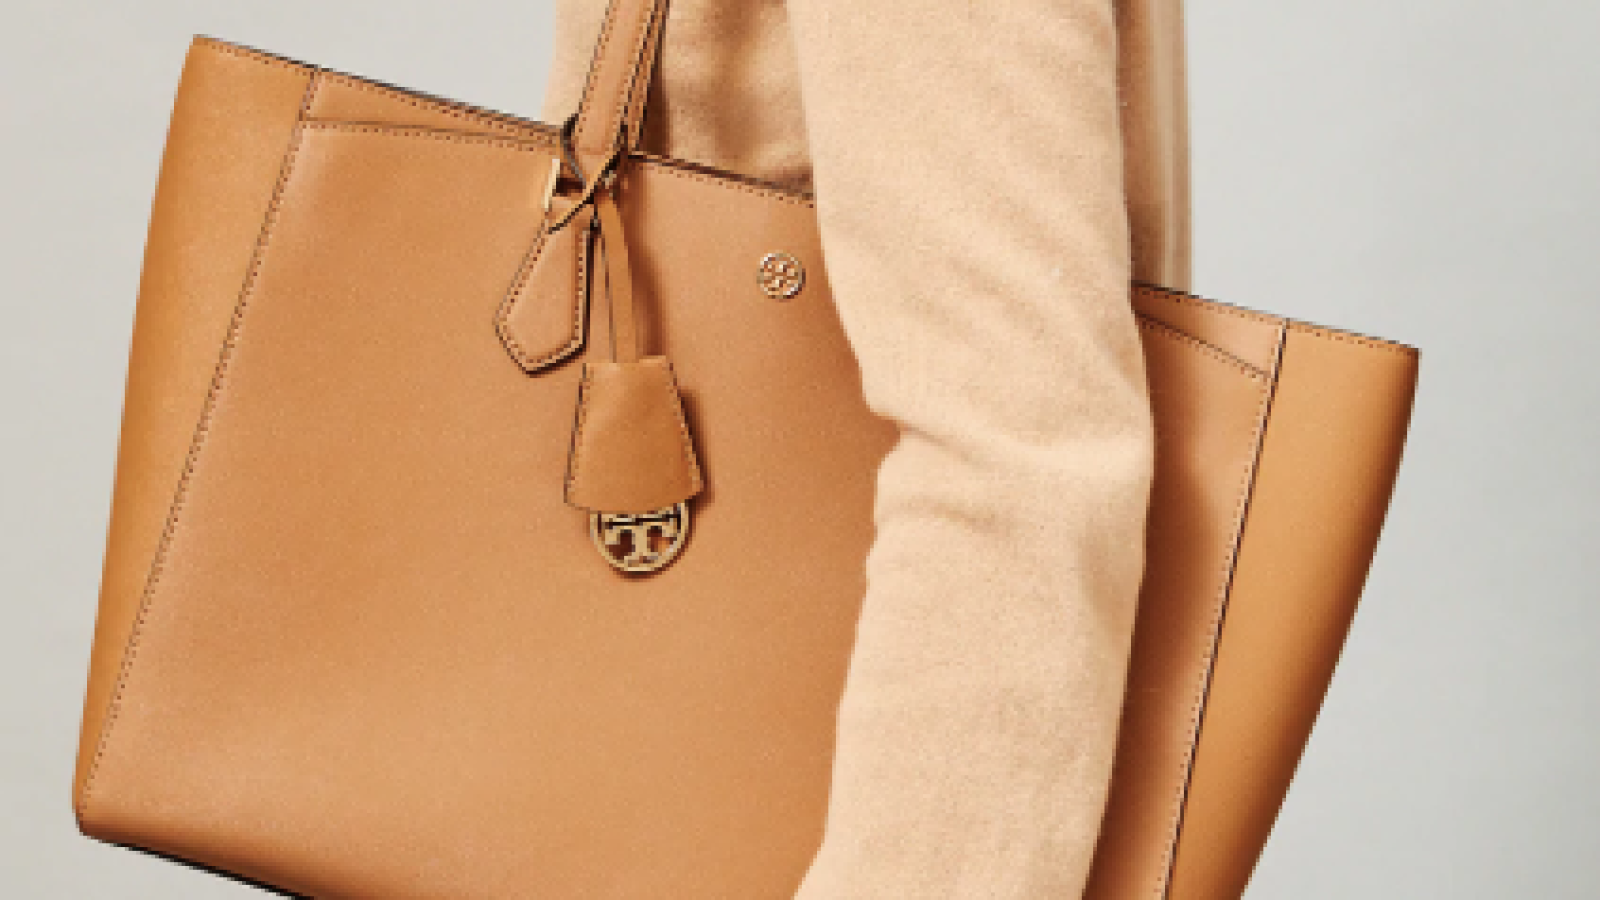 Tory Burch Saffiano Leather Shoulder Bags